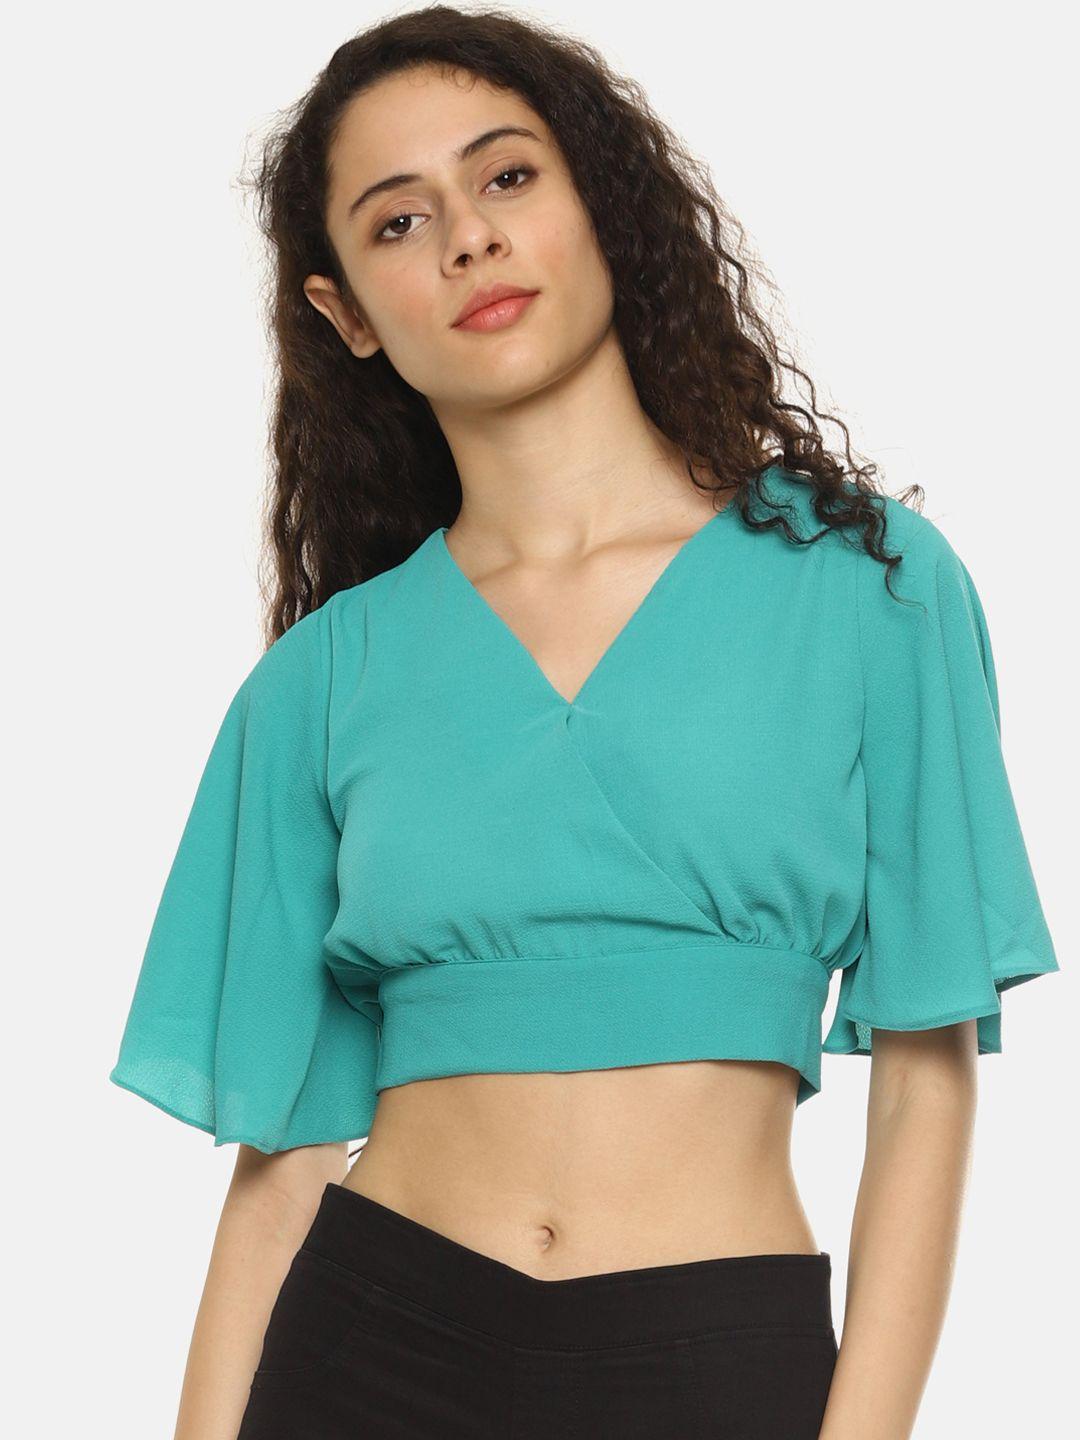 aara women turquoise blue solid crop styled back top